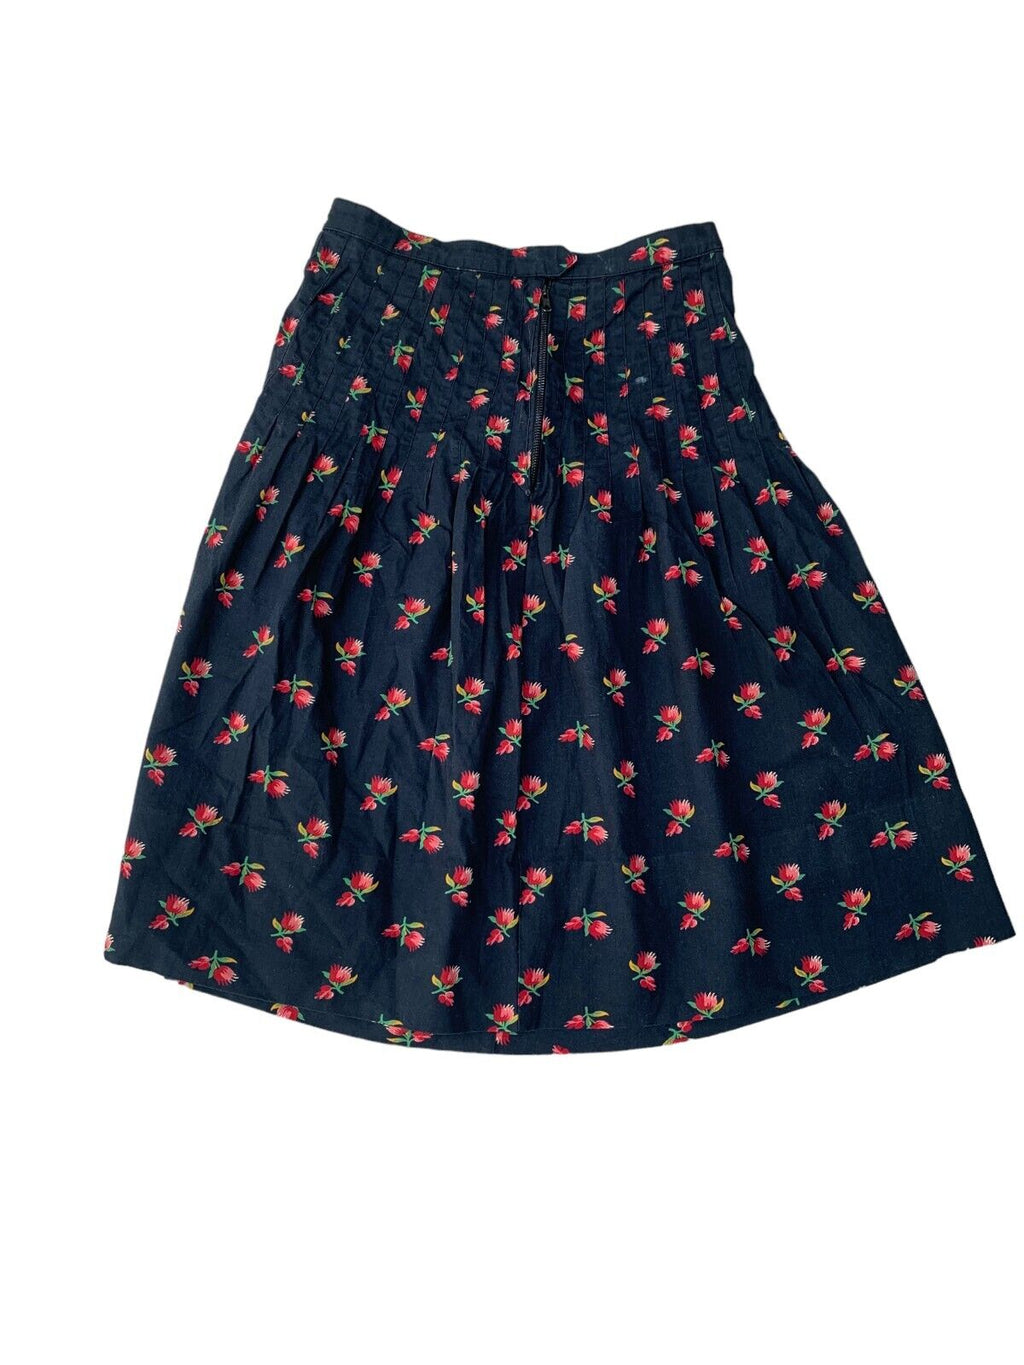 Rive Gauche  1970s Black - Red Floral Skirt